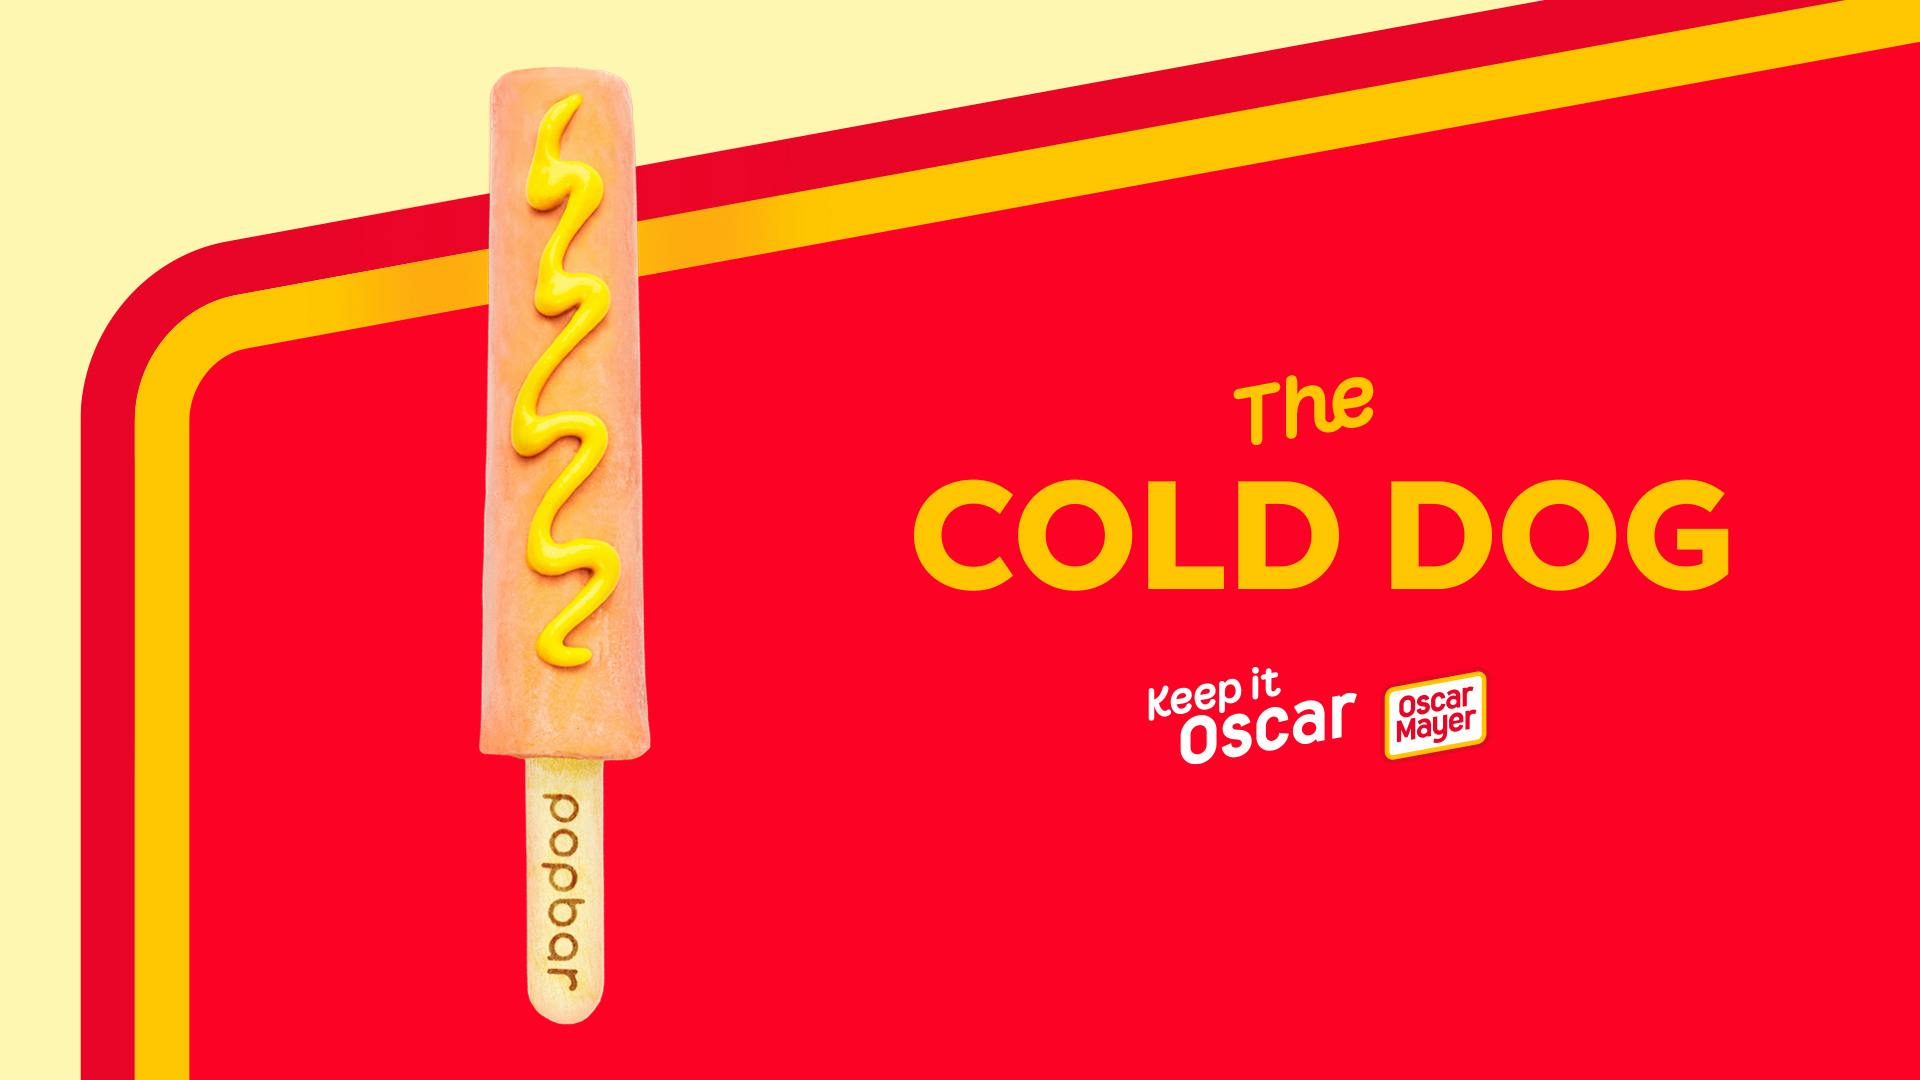 Image shows Oscar Mayer's Cold Dog, a hot-dog flavoured popsicle